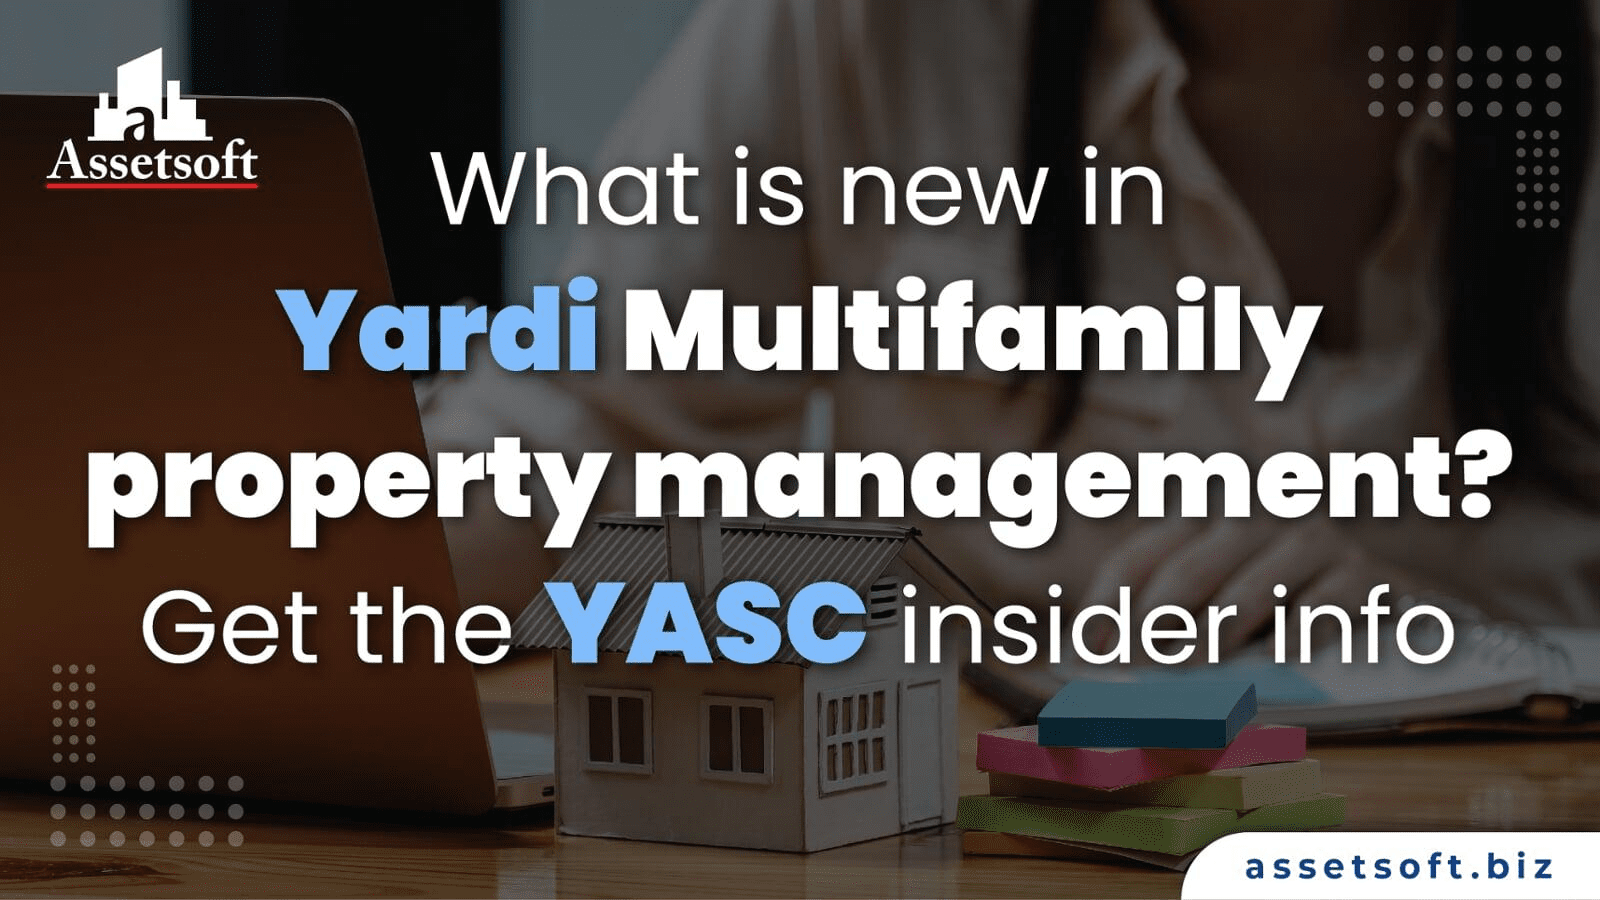 What is new in Yardi Multifamily property management? Get the YASC insider info